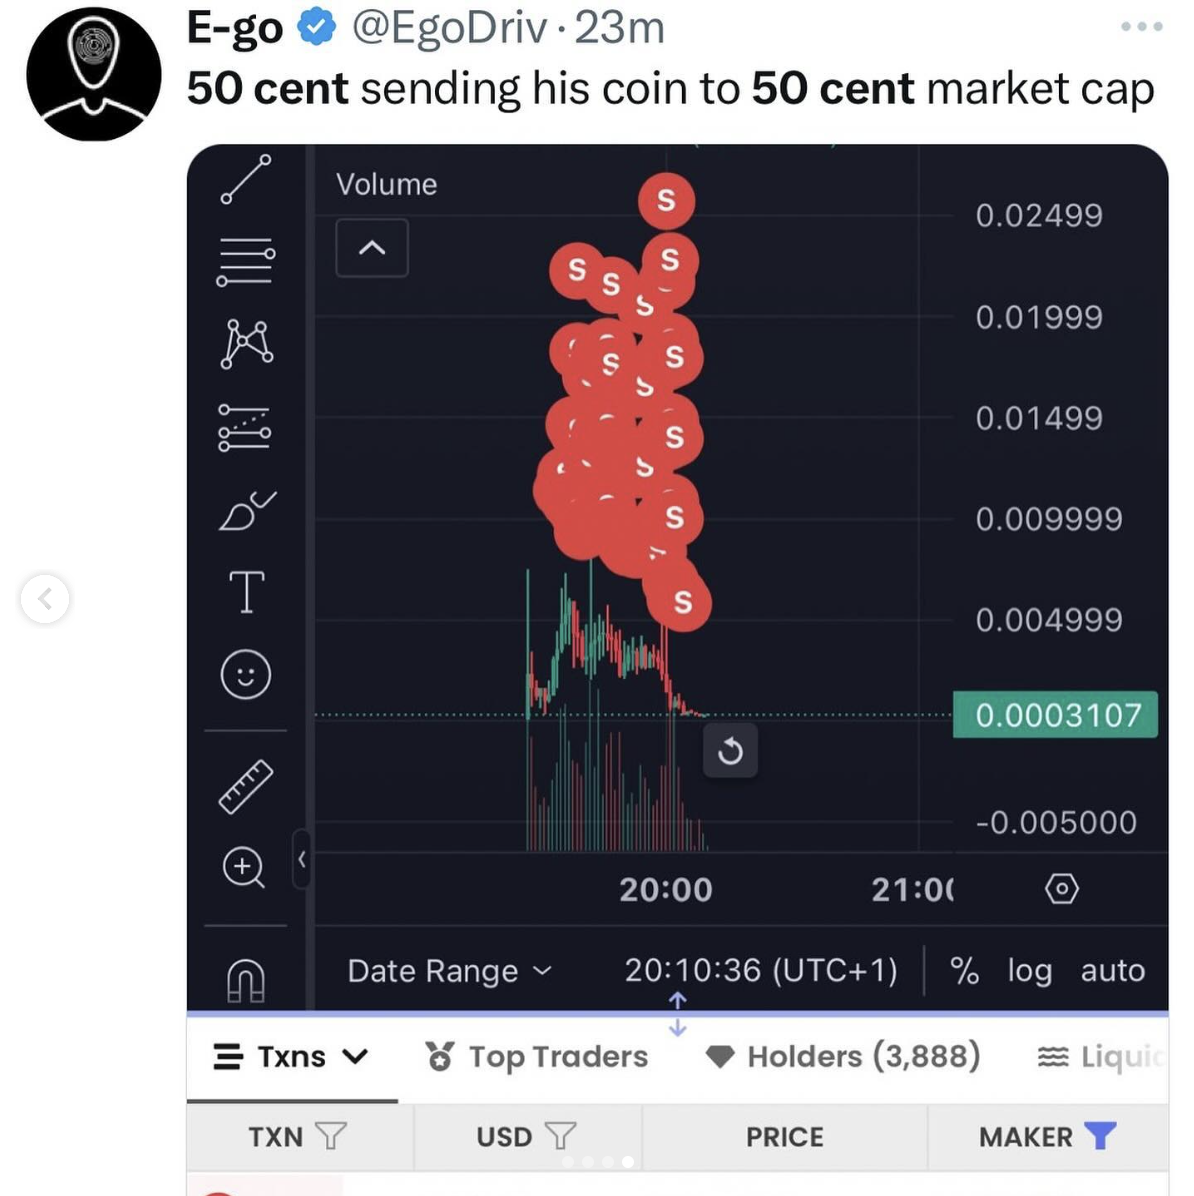 Tweet by E-go from @EgoDriv about 50 Cent&#x27;s coin reaching 50 Cent market cap, showing a cryptocurrency chart with various data points and market activity